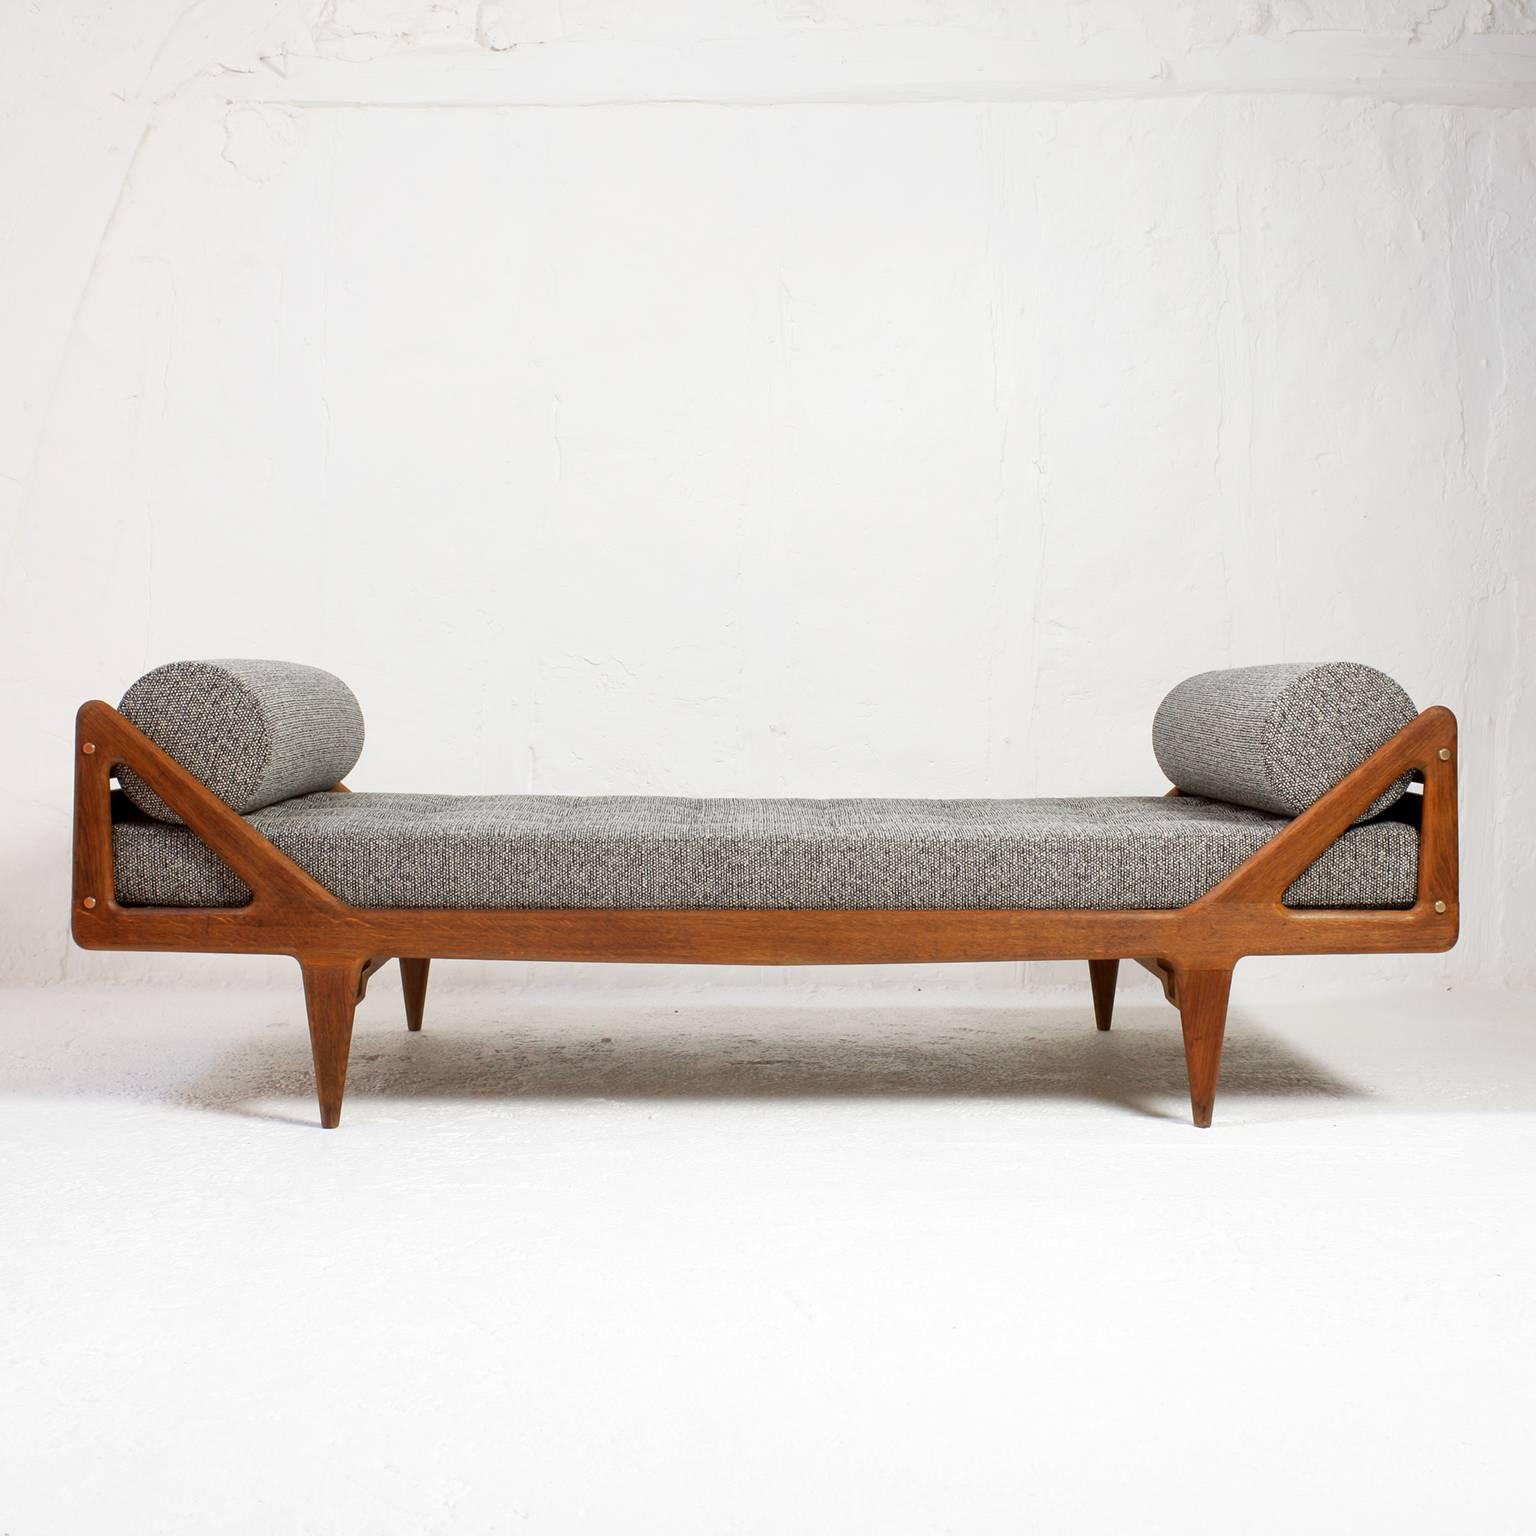 Daybed by Louis Paolozzi in solid oak with Brass Details with from the 1950s (French reconstruction). Nice patina.
Original metal bed frame in good condition.
New Kvadrat upholstery and foam.